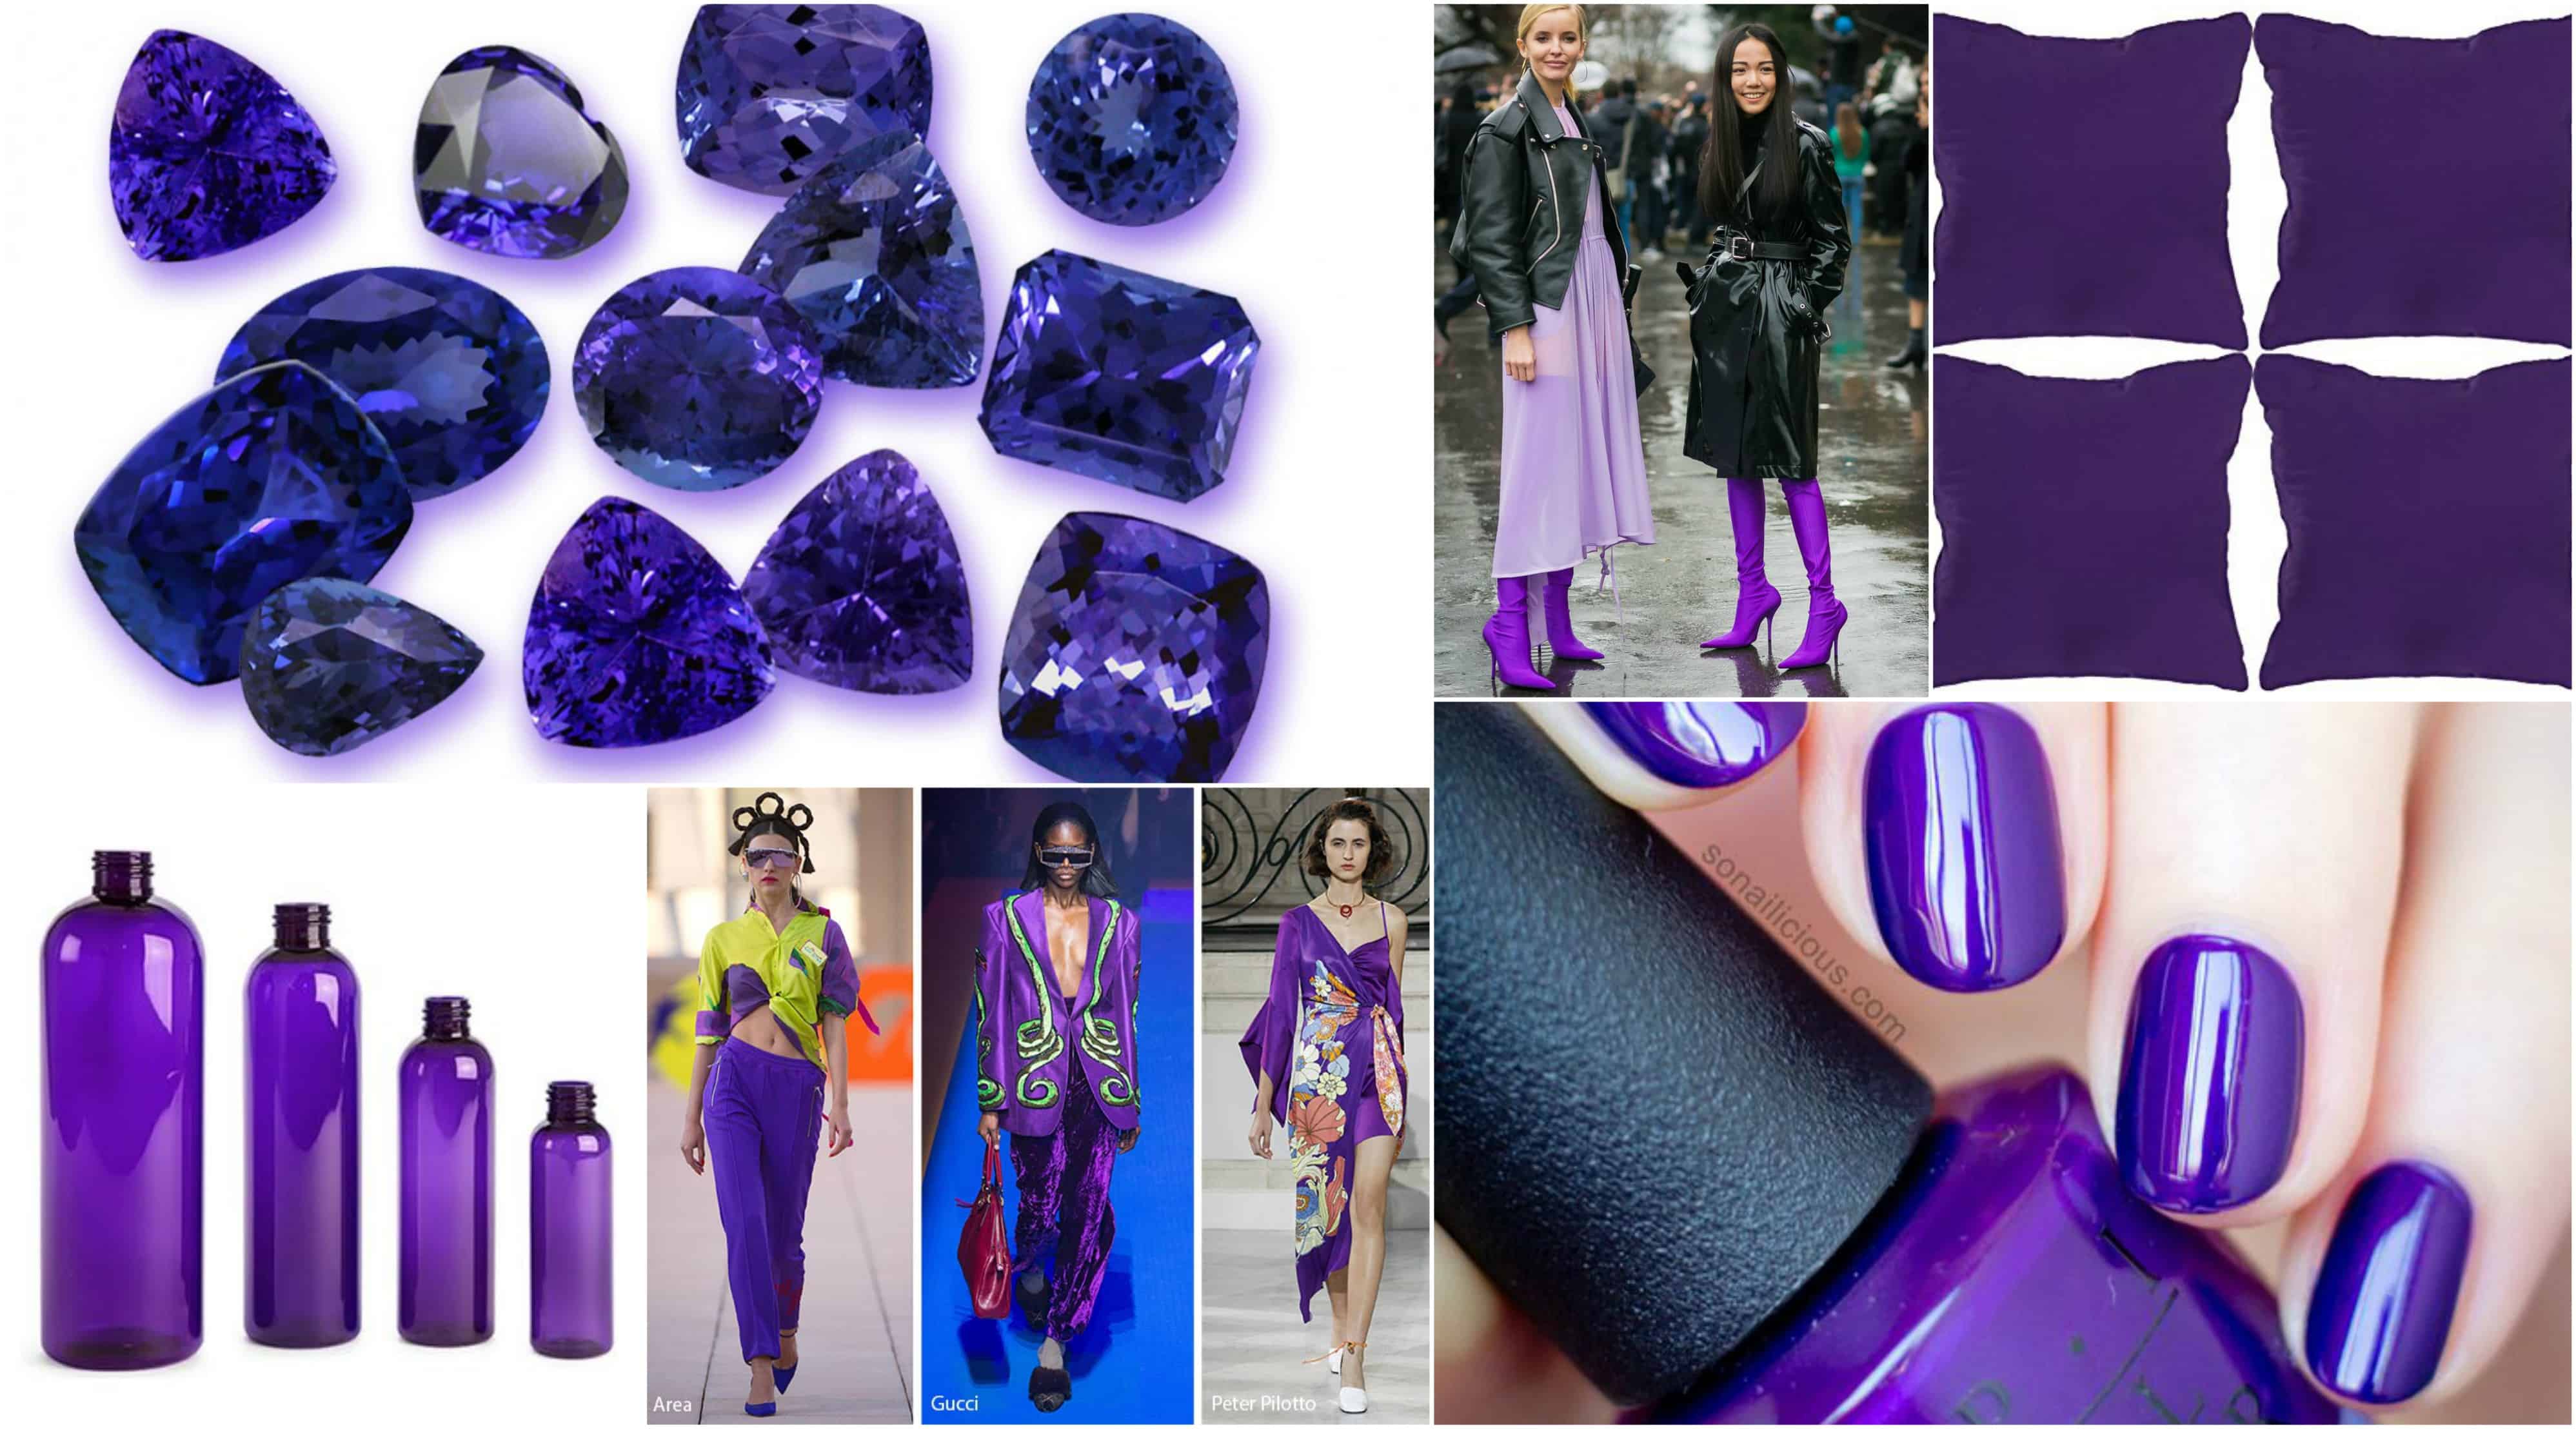 Pantone Color of the Year 2018 Ultra Violet